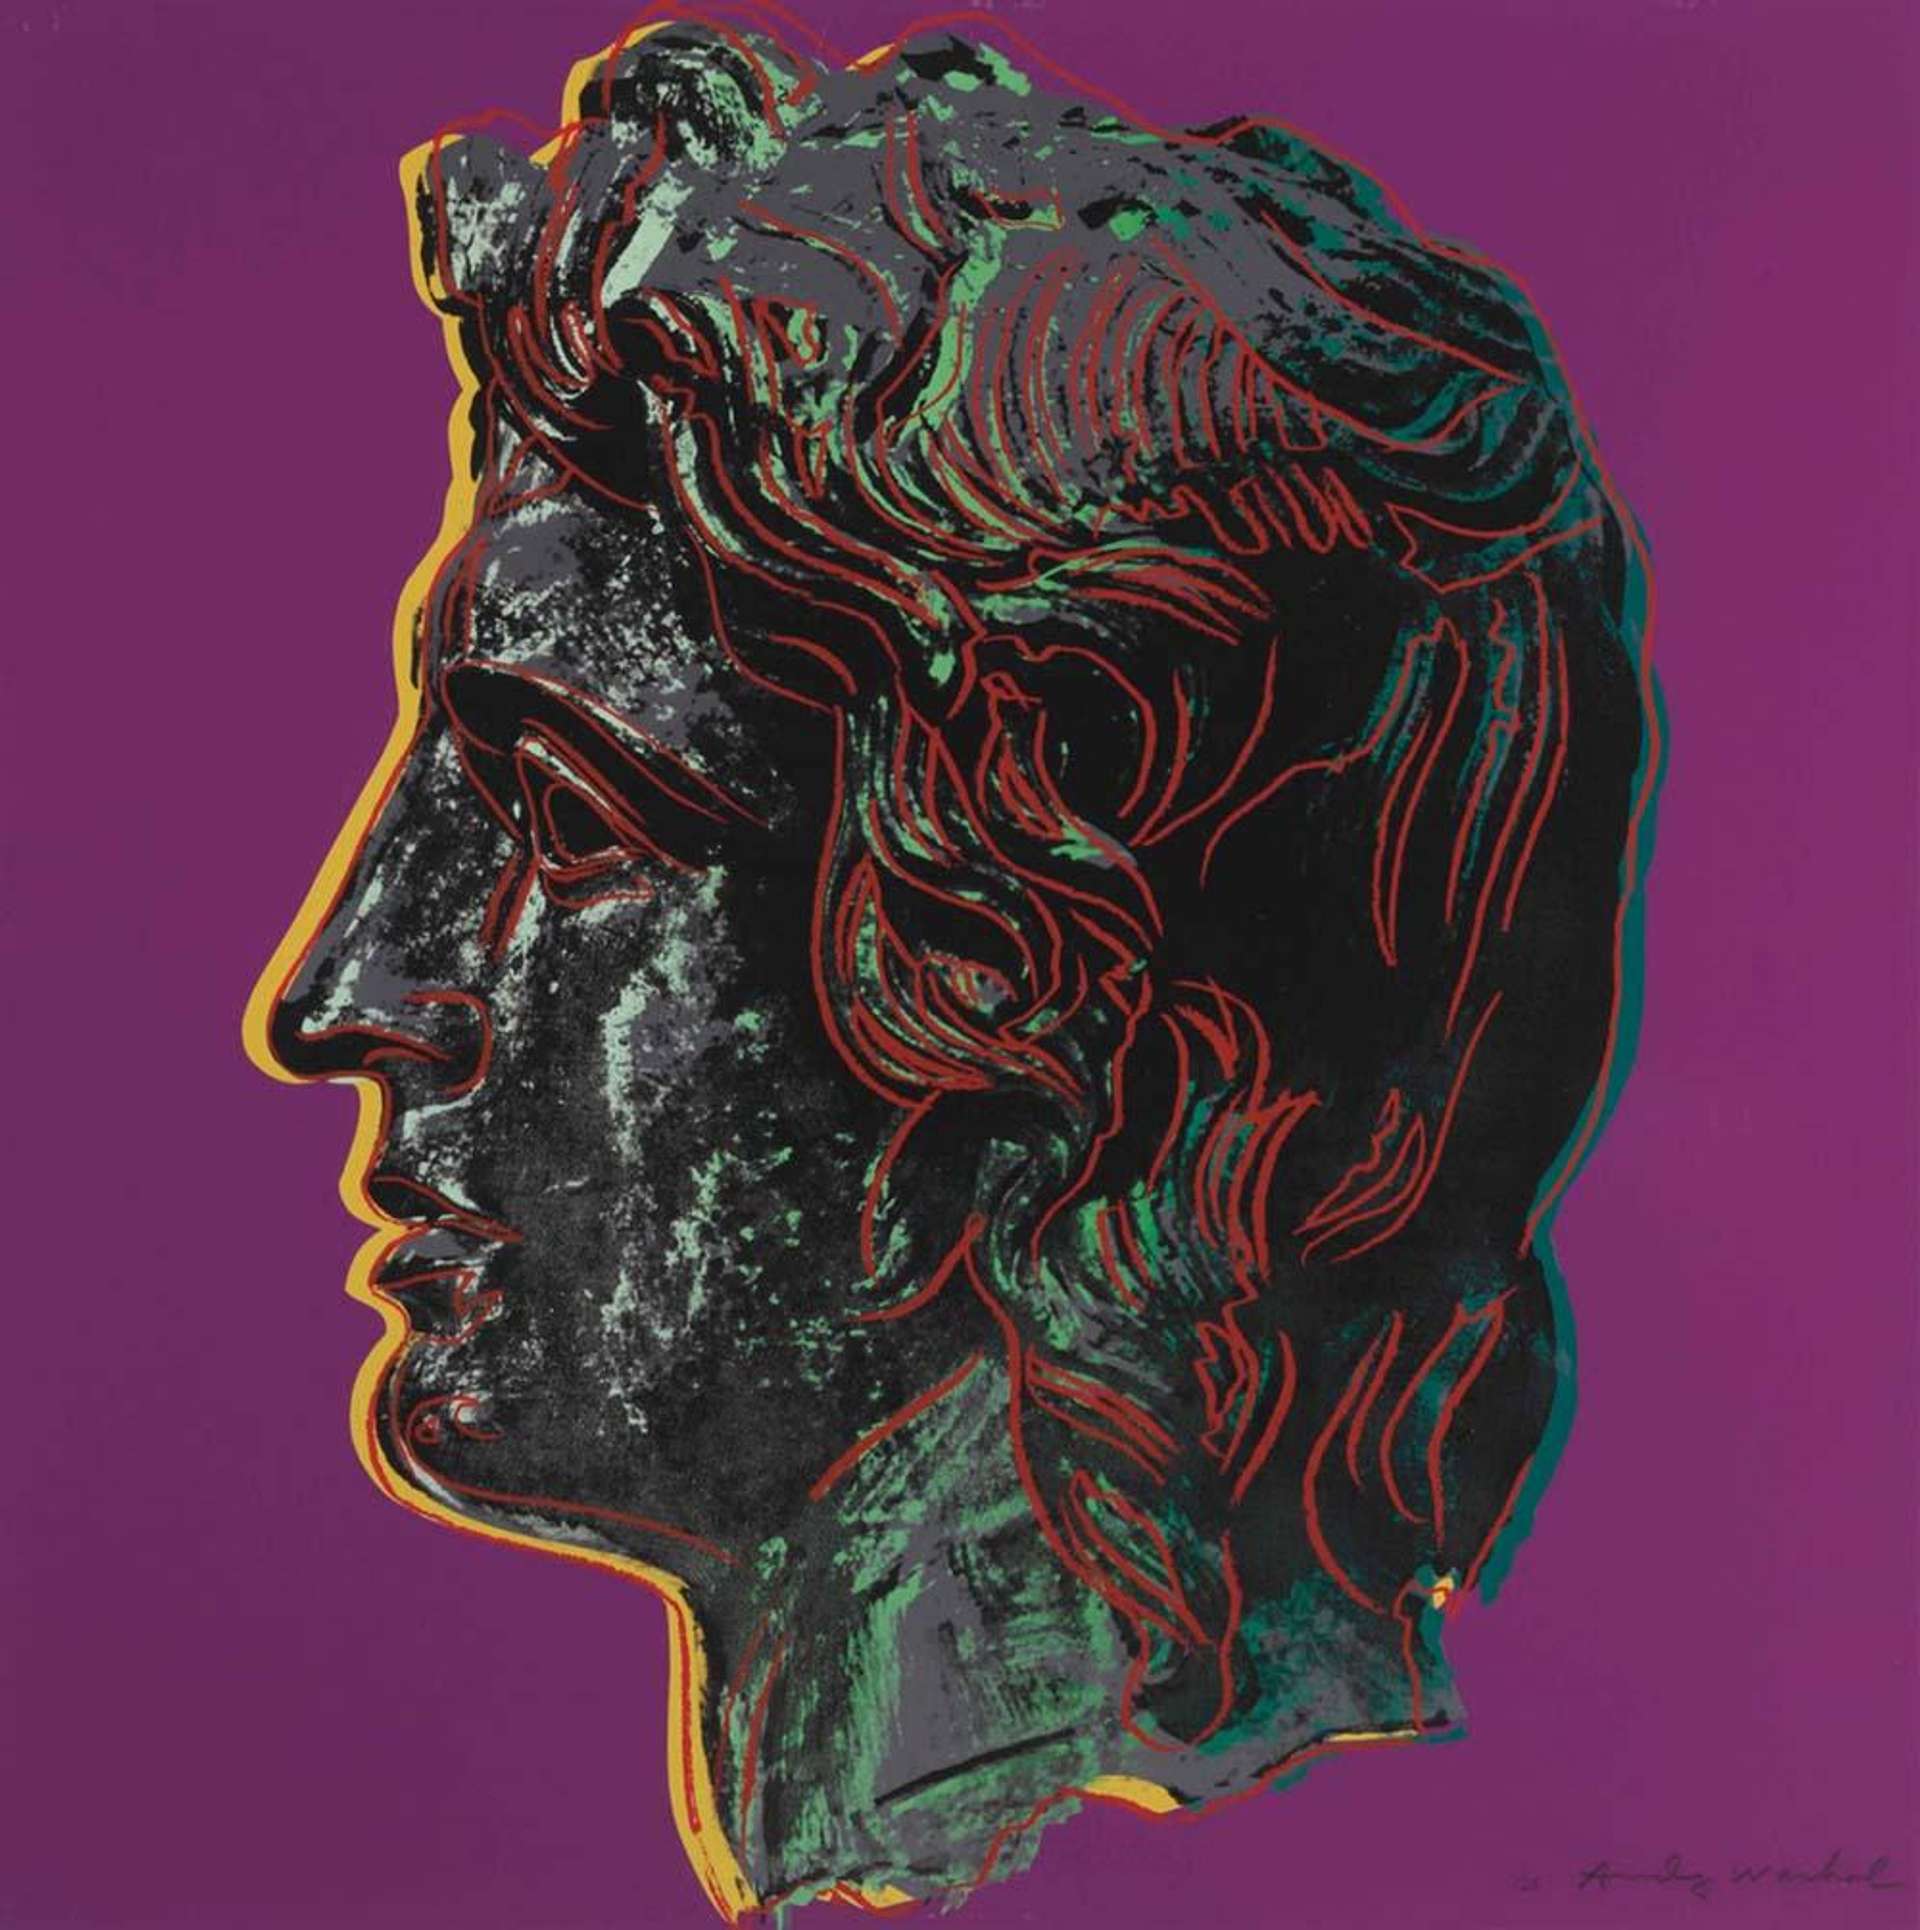 Andy Warhol: Alexander The Great (F. & S. II.291) - Signed Print